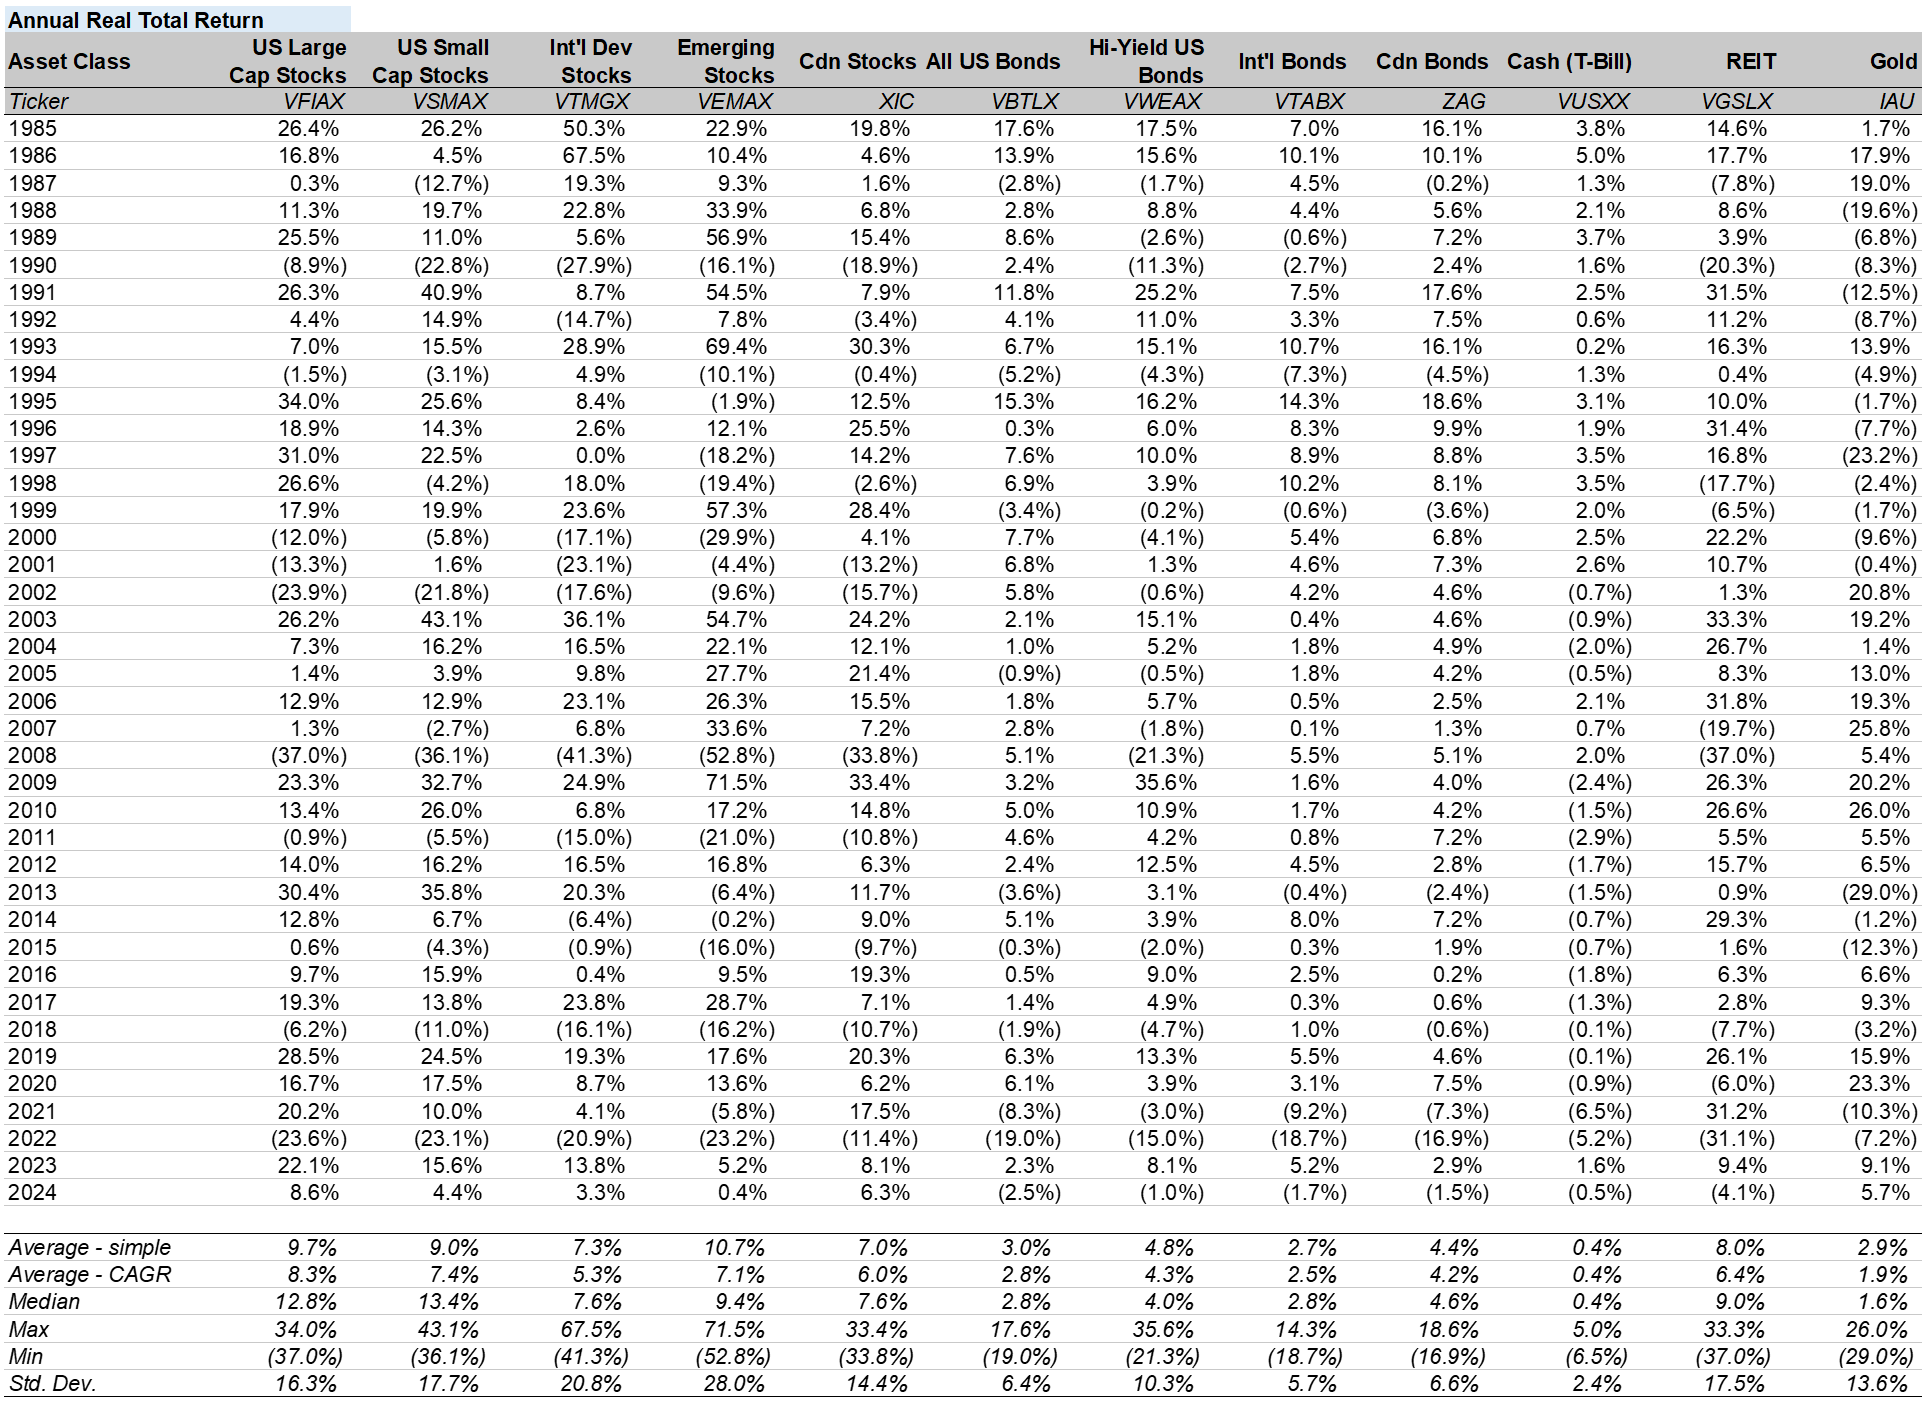 Investment returns by asset class. Real total return values by year.